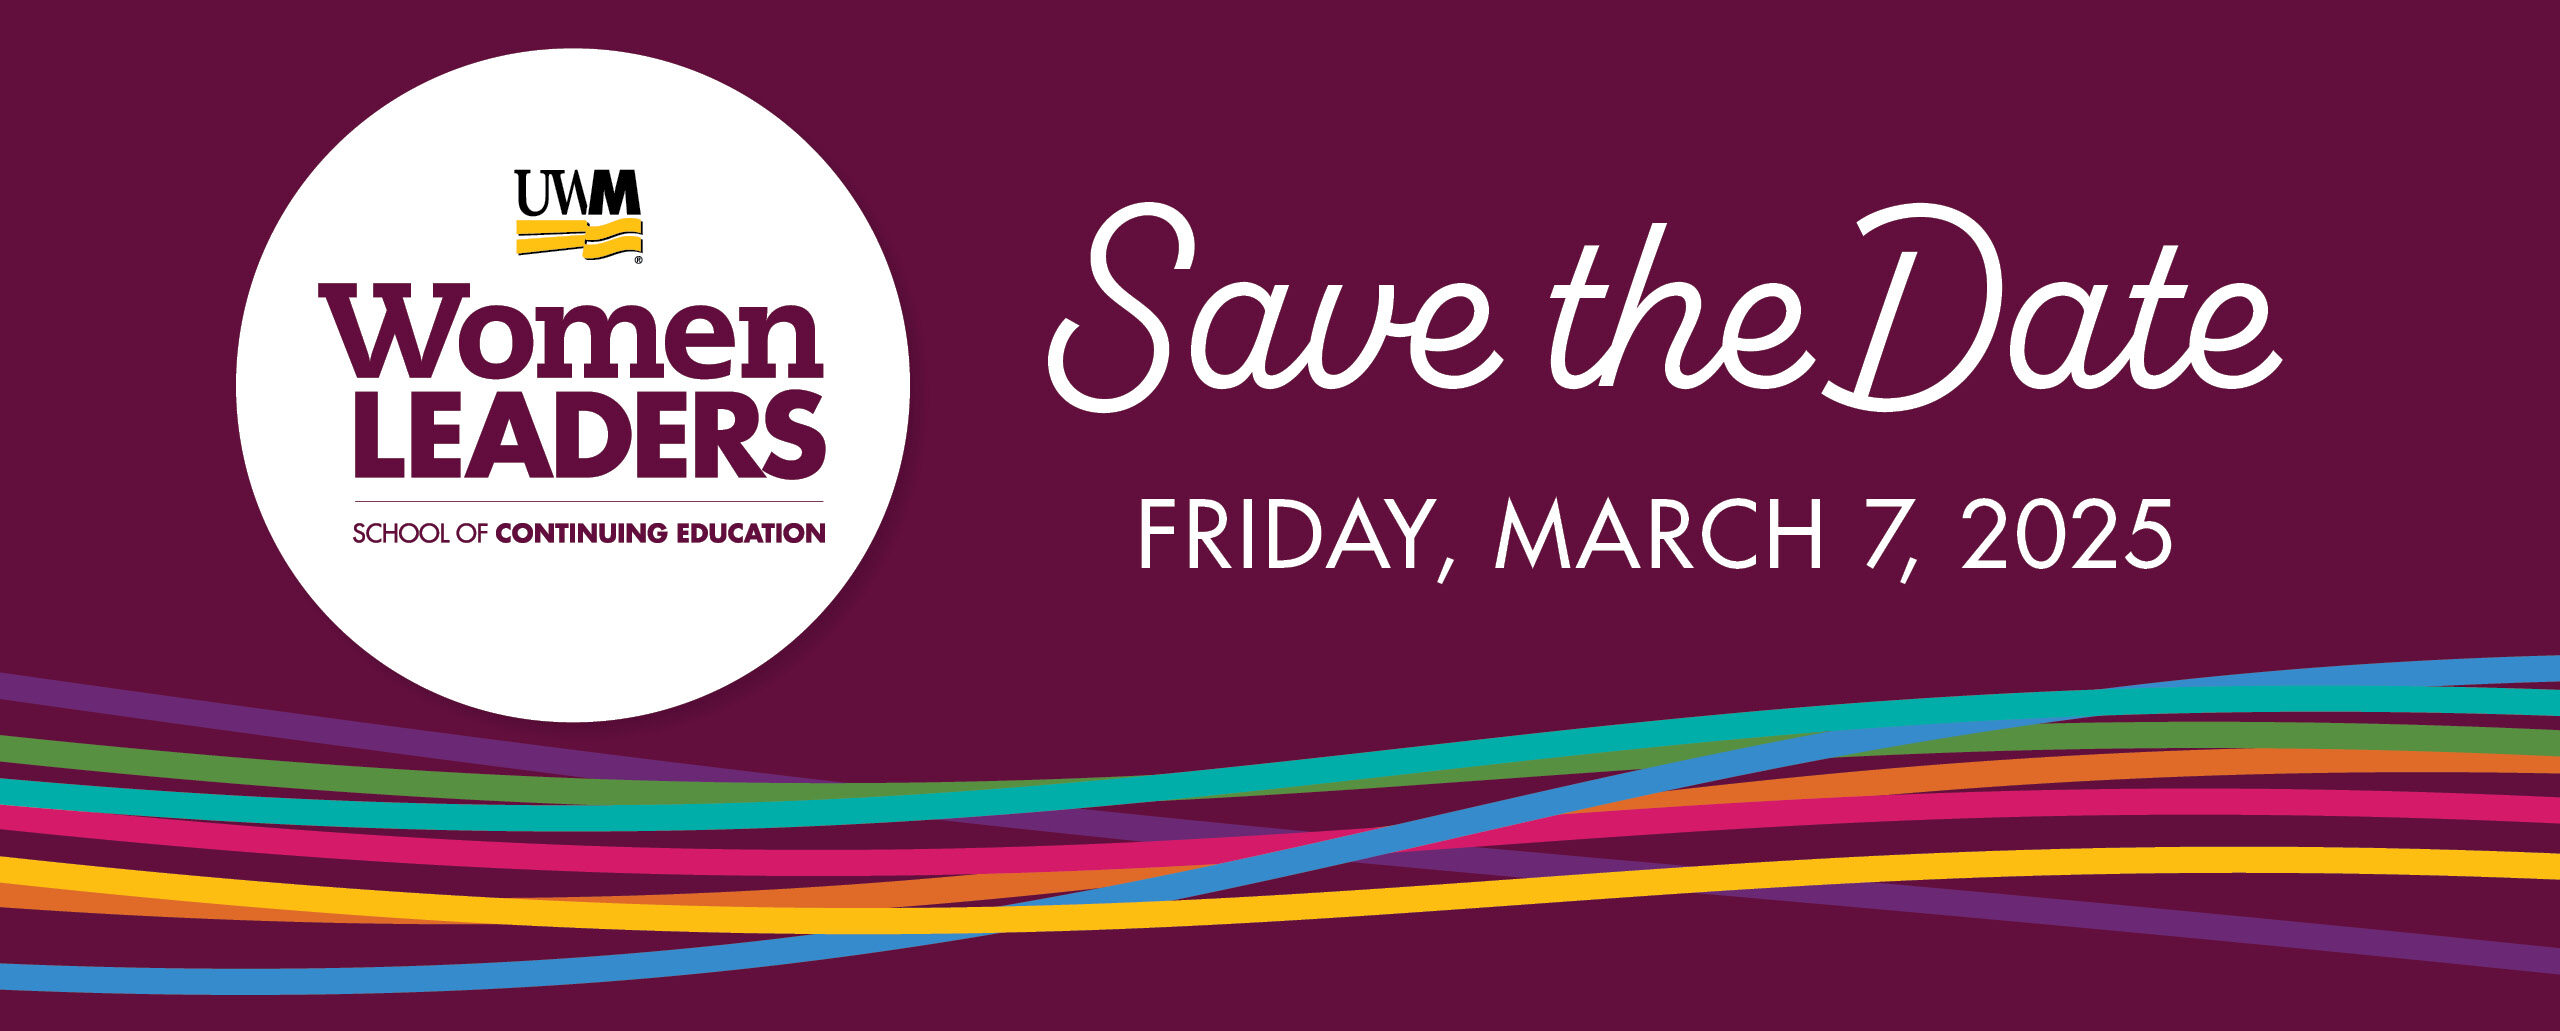 Women Leaders Conference - Save the Date - Friday, March 7, 2025